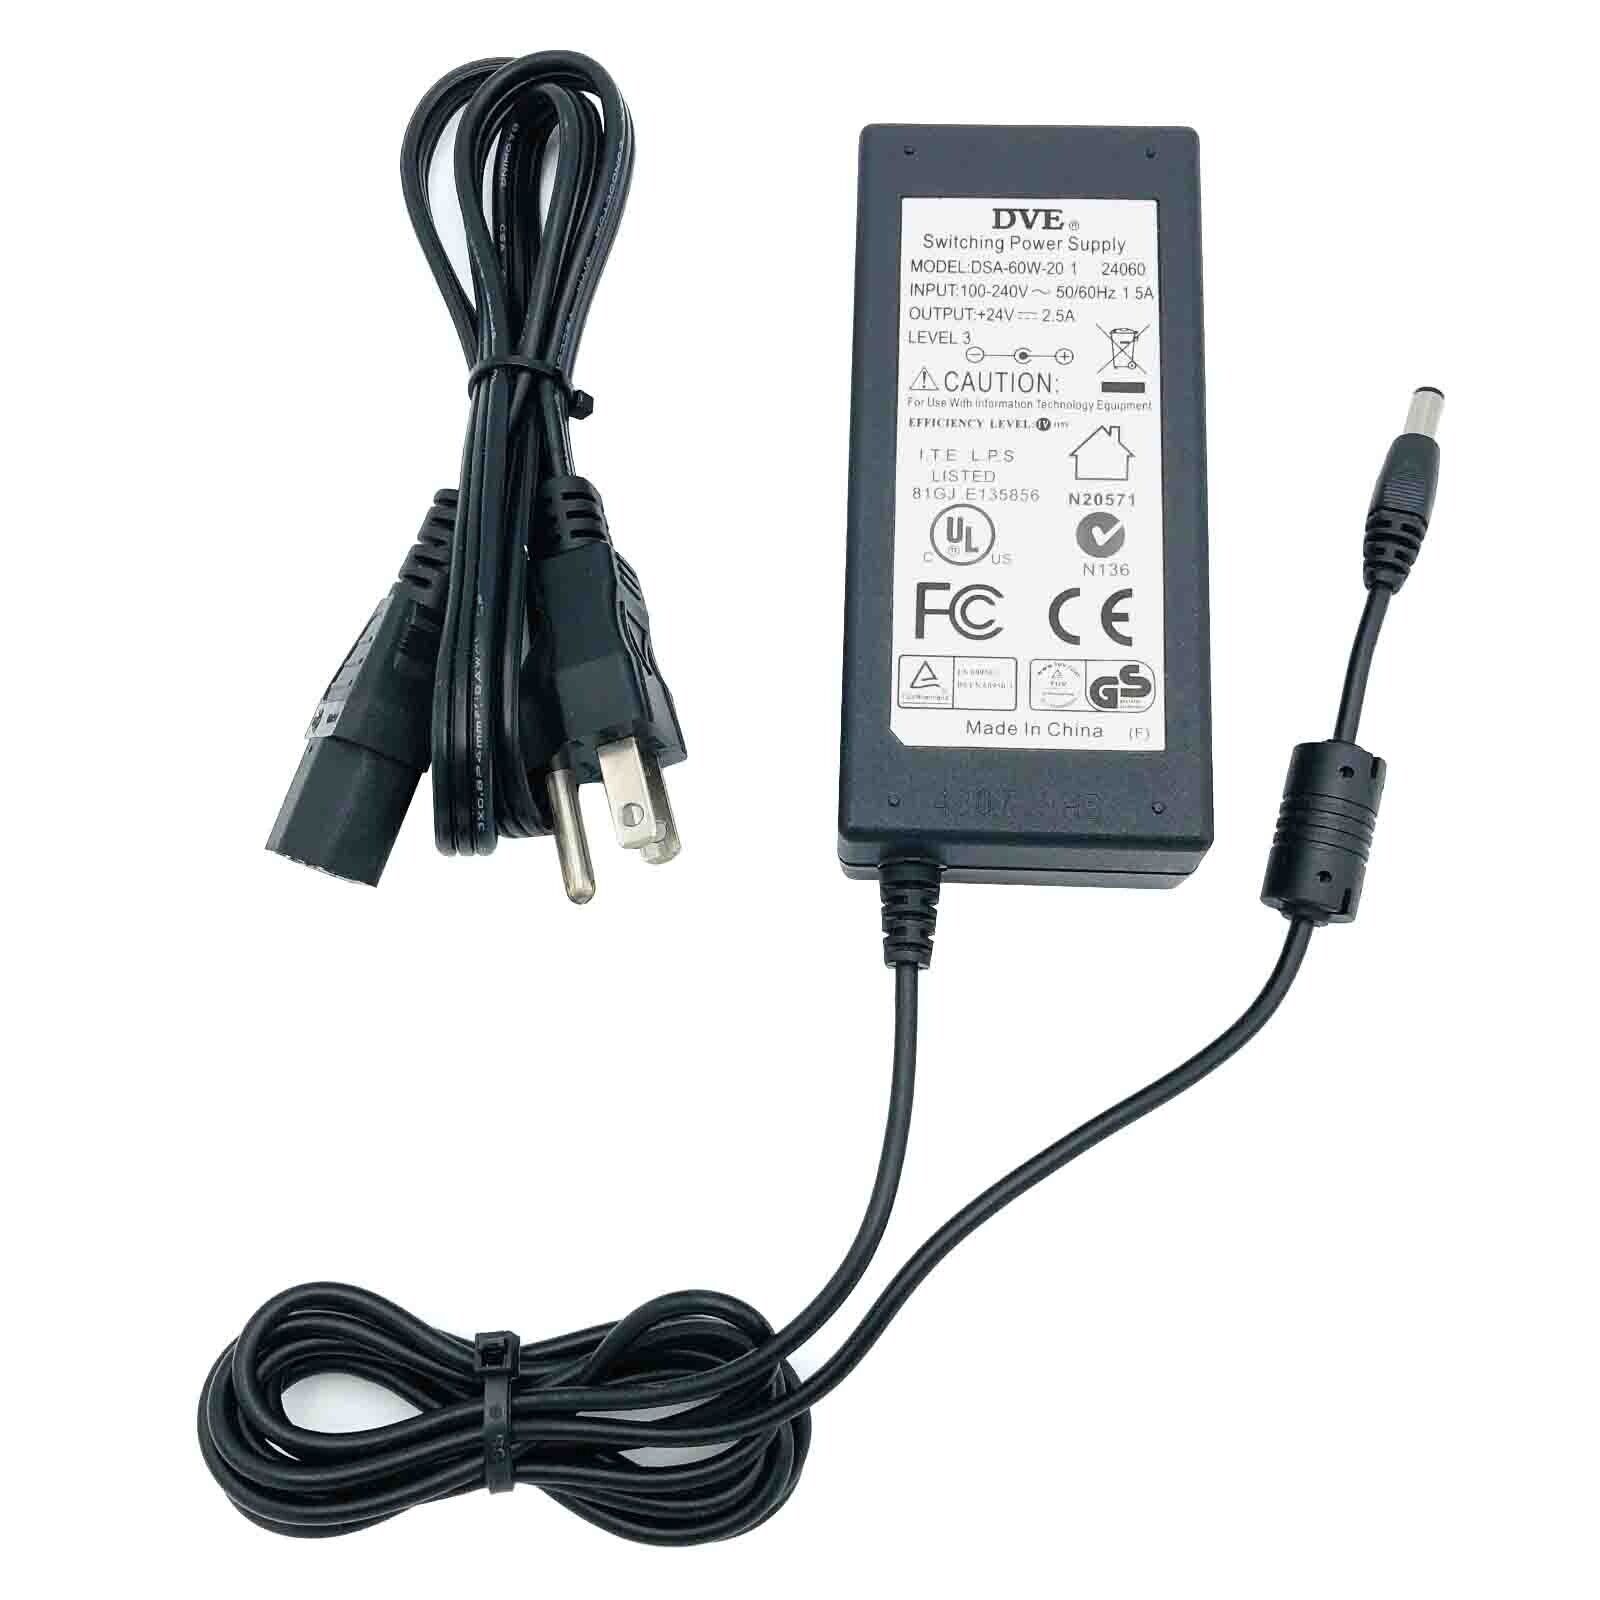 *Brand NEW*Genuine DVE 24V 2.5A AC Adapter for Mikrotik Routerboard RB2011UiAS-2HnD-IN Power Supply